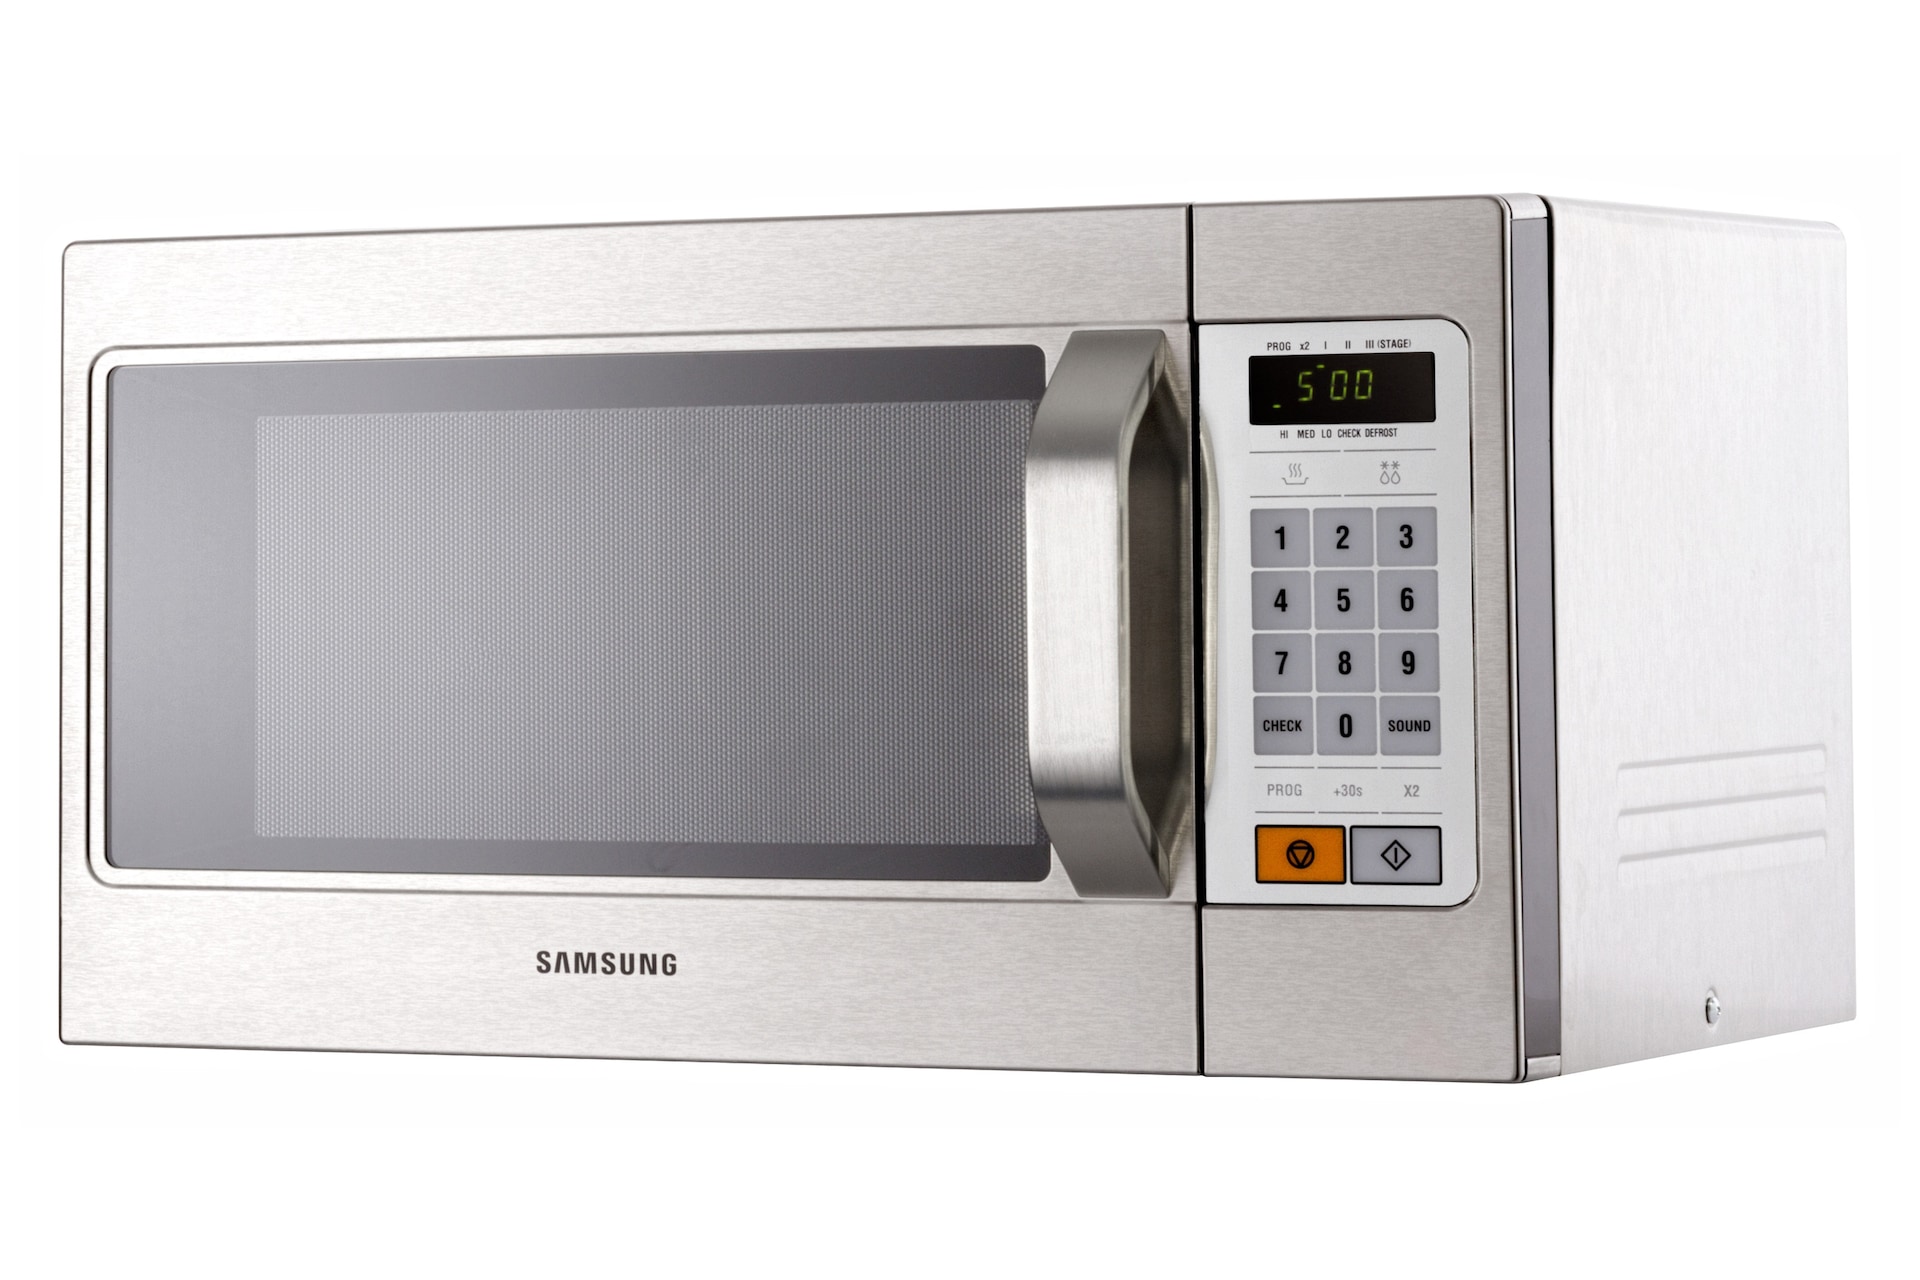 CM1089 Commercial Microwave Oven 1100W, 26L | Samsung Business UK